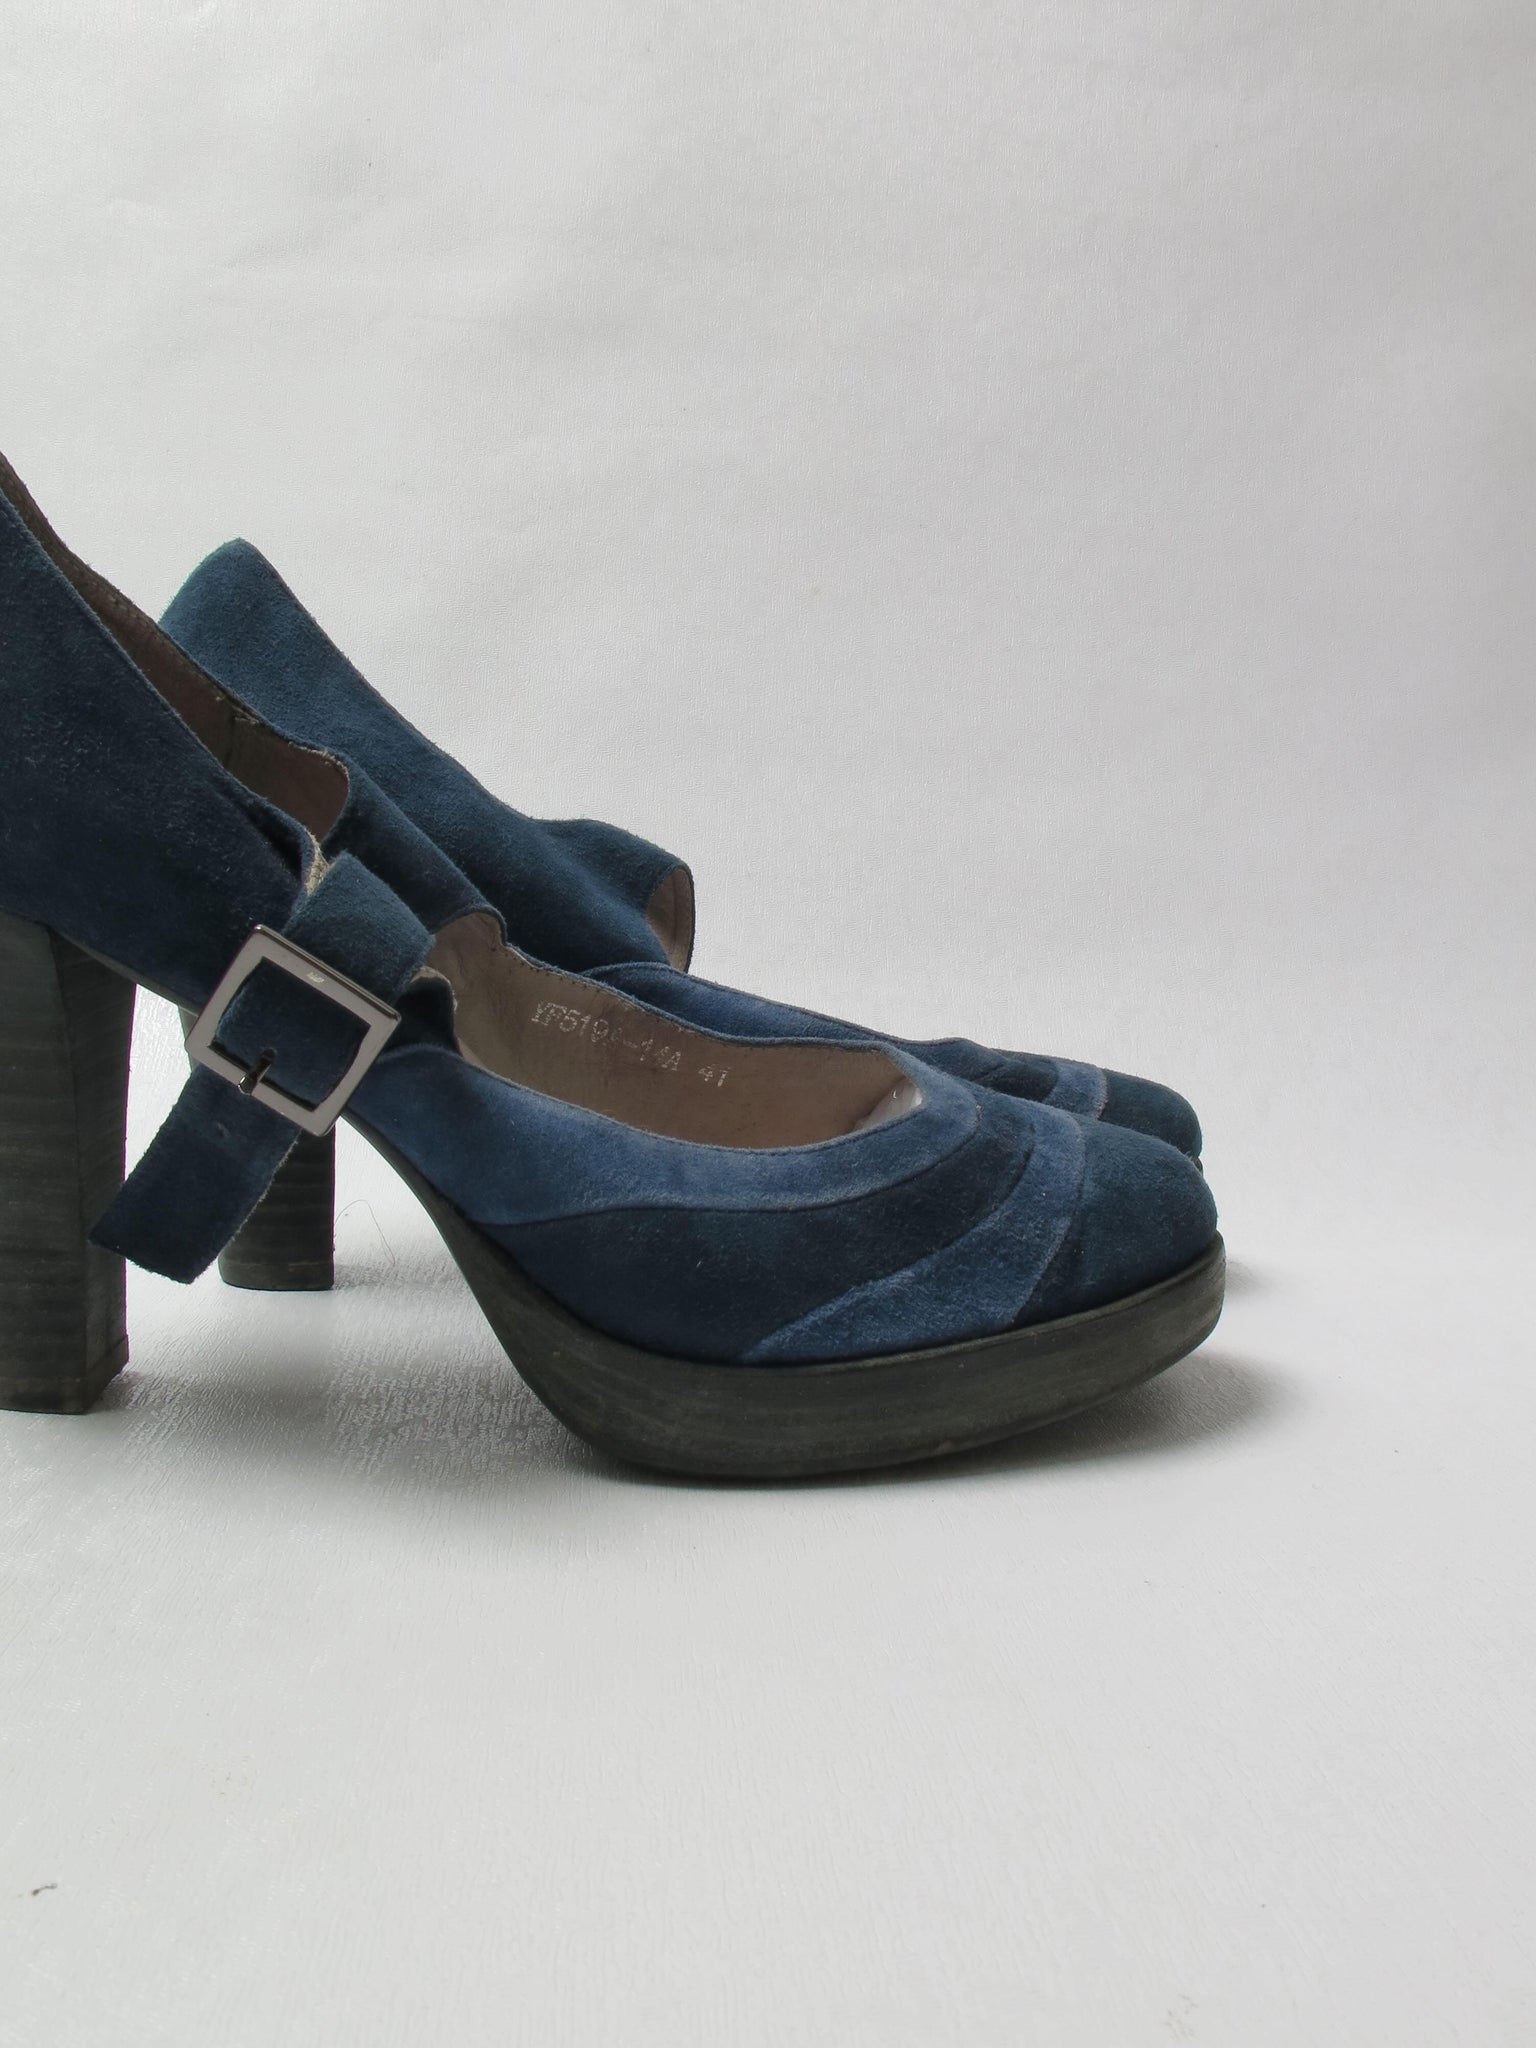 Women's Blue & Navy Mary Jane Suede Shoes 41 - The Harlequin